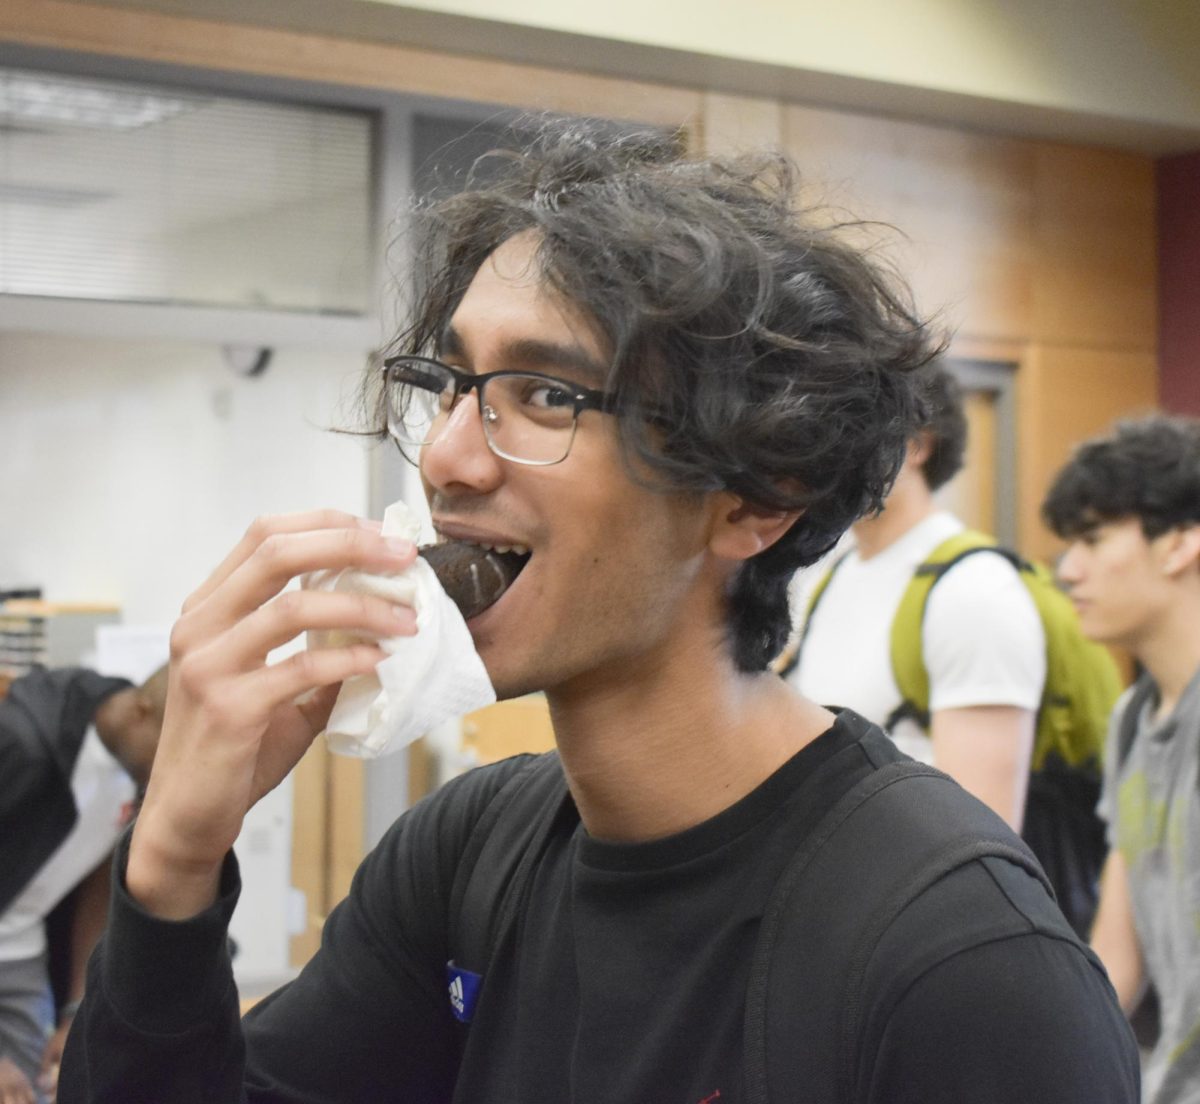 Senior Jawad Bhullar munches on a chocolate donut at the senior breakfast.  From glazed, chocolate with or without sprinkles, yellow frosted, a  variety of different donuts were available for seniors to enjoy.